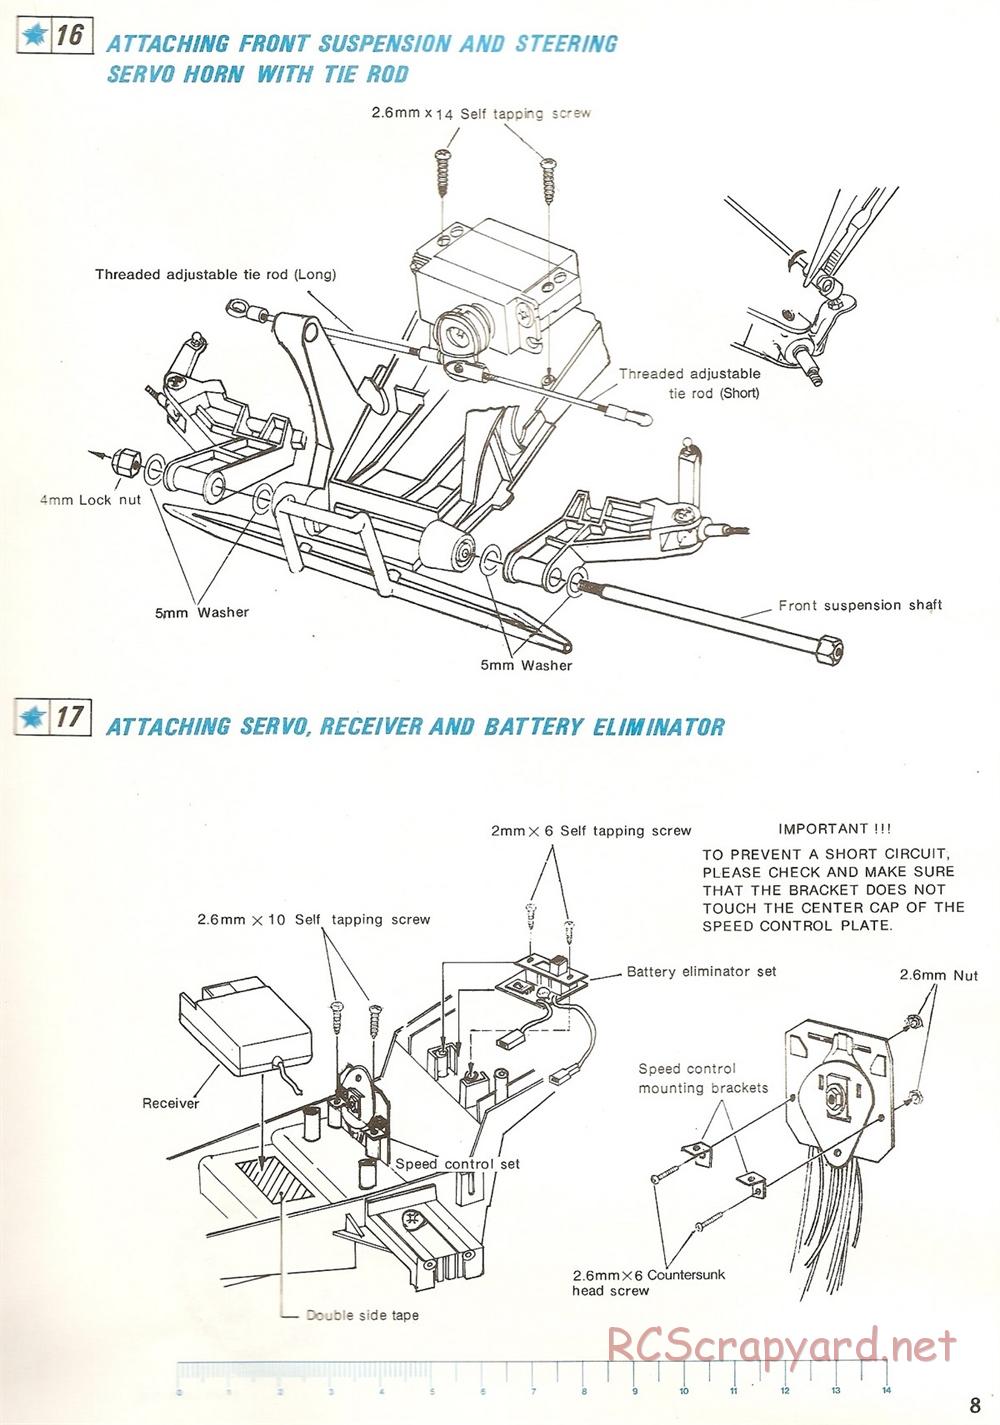 Traxxas - The Cat (1987) - Manual - Page 9